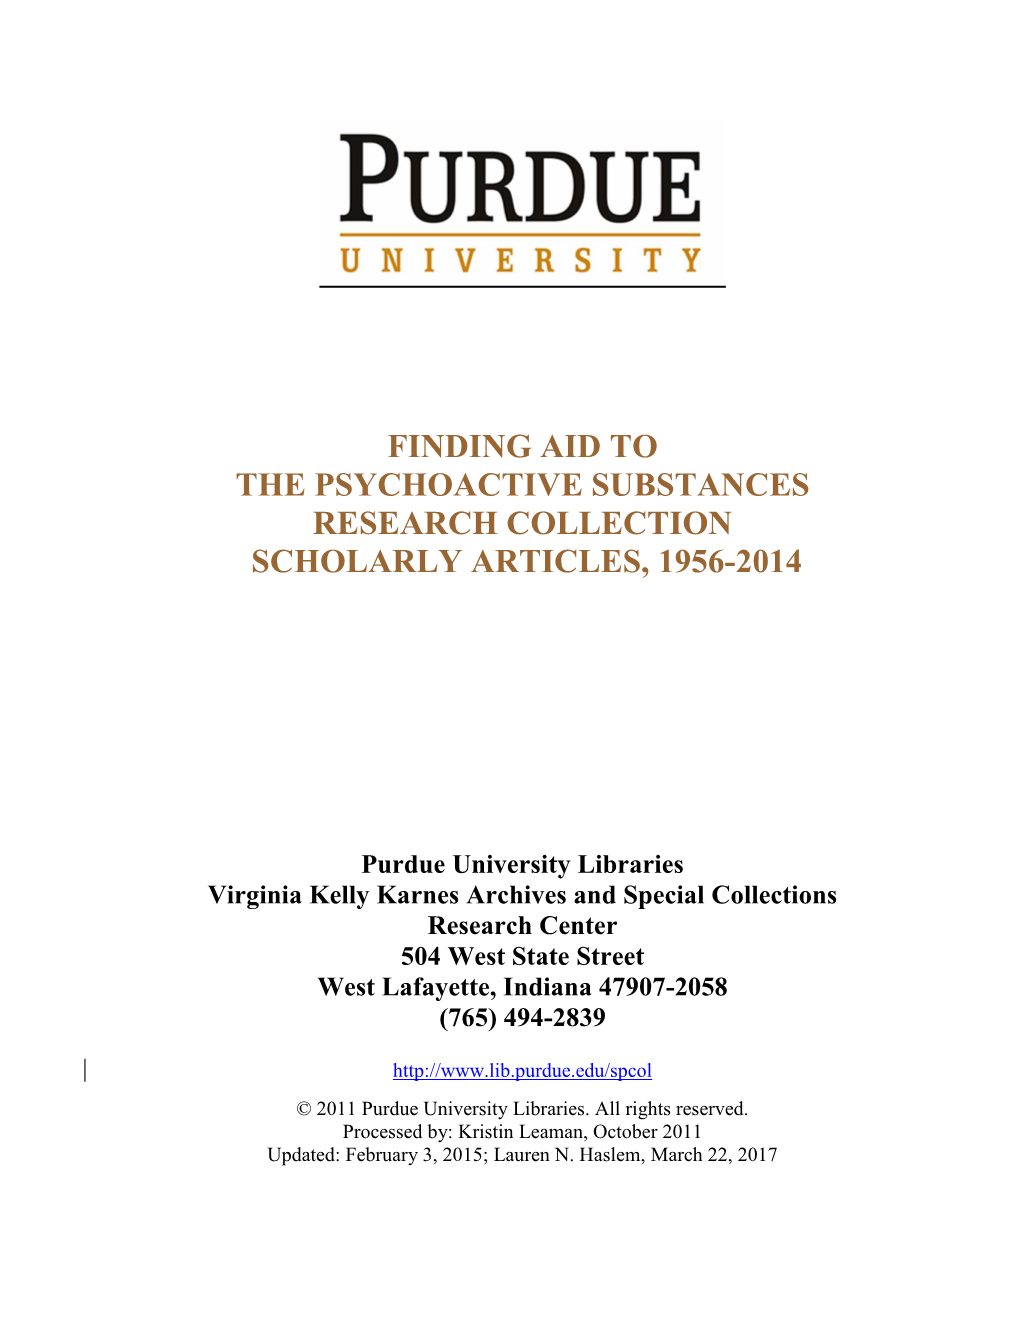 Finding Aid to the Psychoactive Substances Research Collection Scholarly Articles, 1956-2014